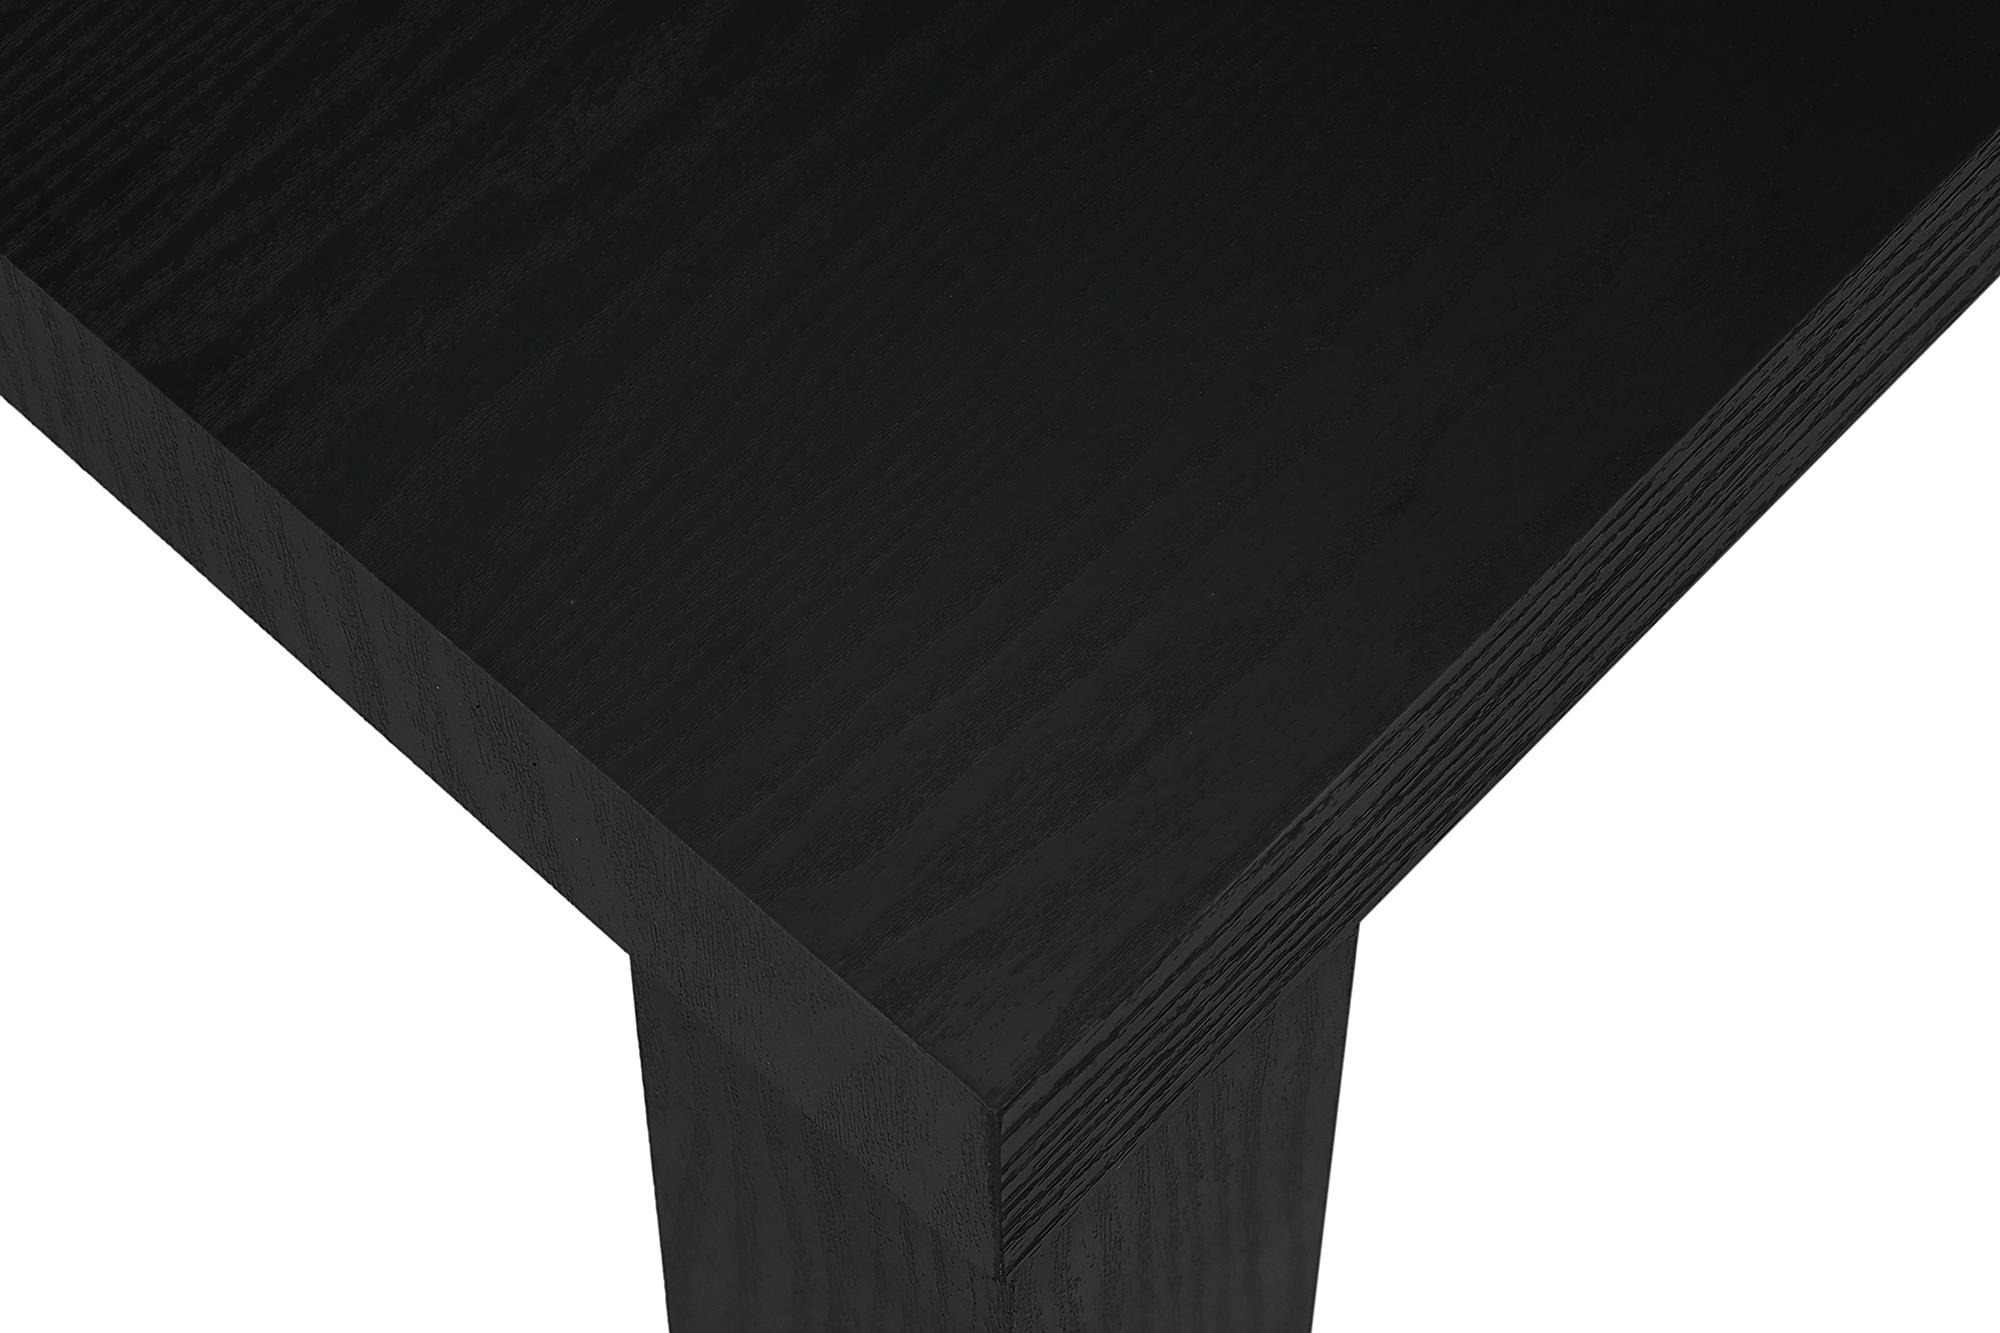 Mainstays Parson's End Table, Black - image 3 of 8